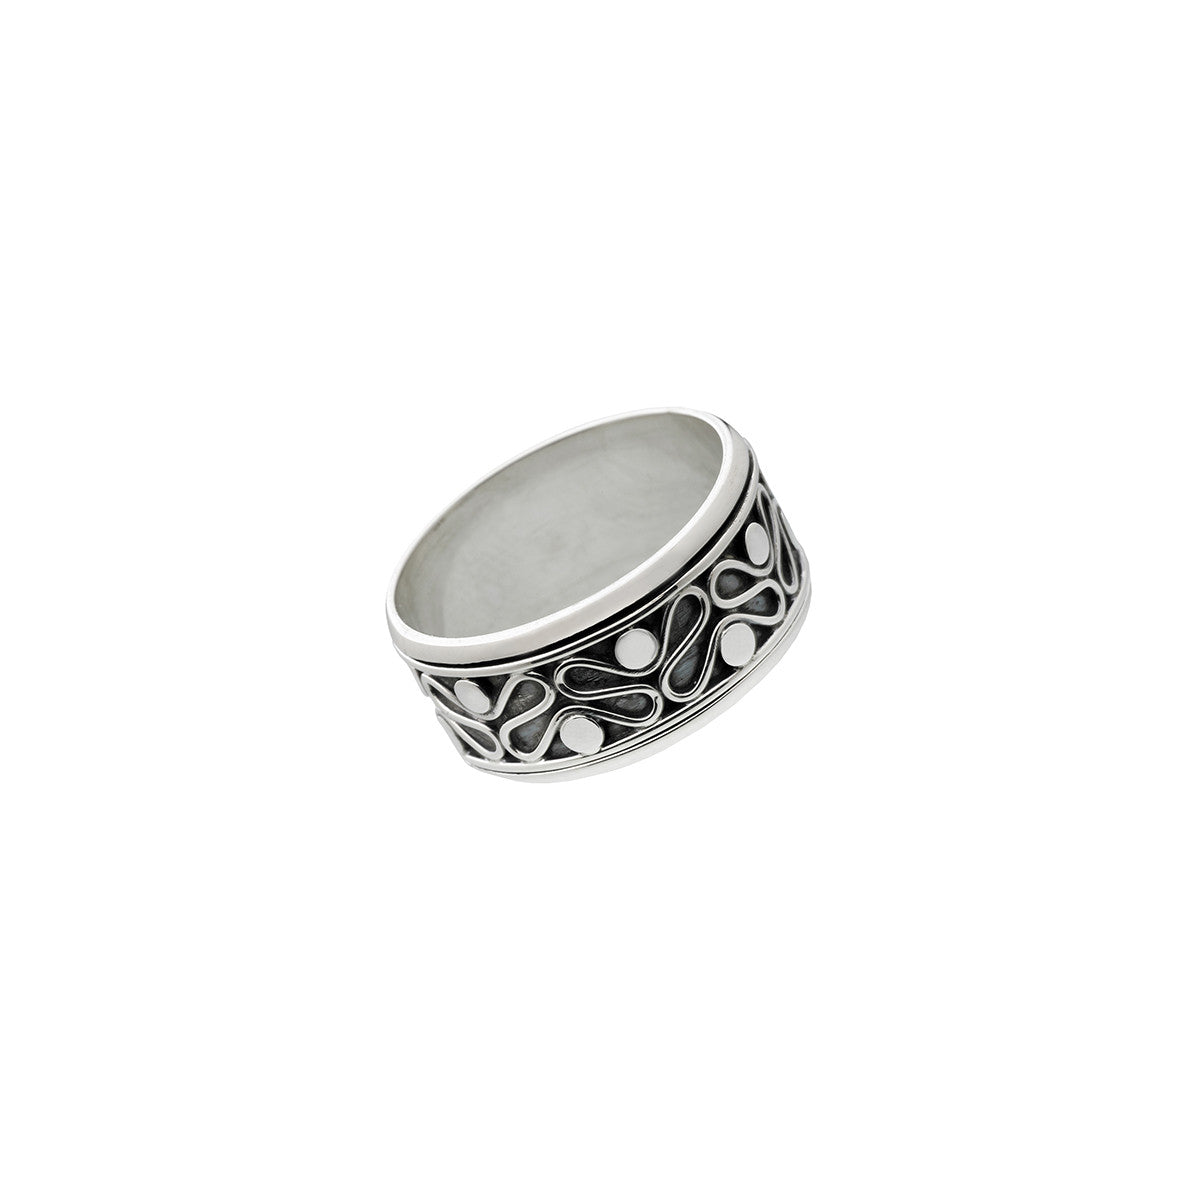 Epsilon Infinity Sterling Silver Spin Ring - Cynthia Gale New York Jewelry